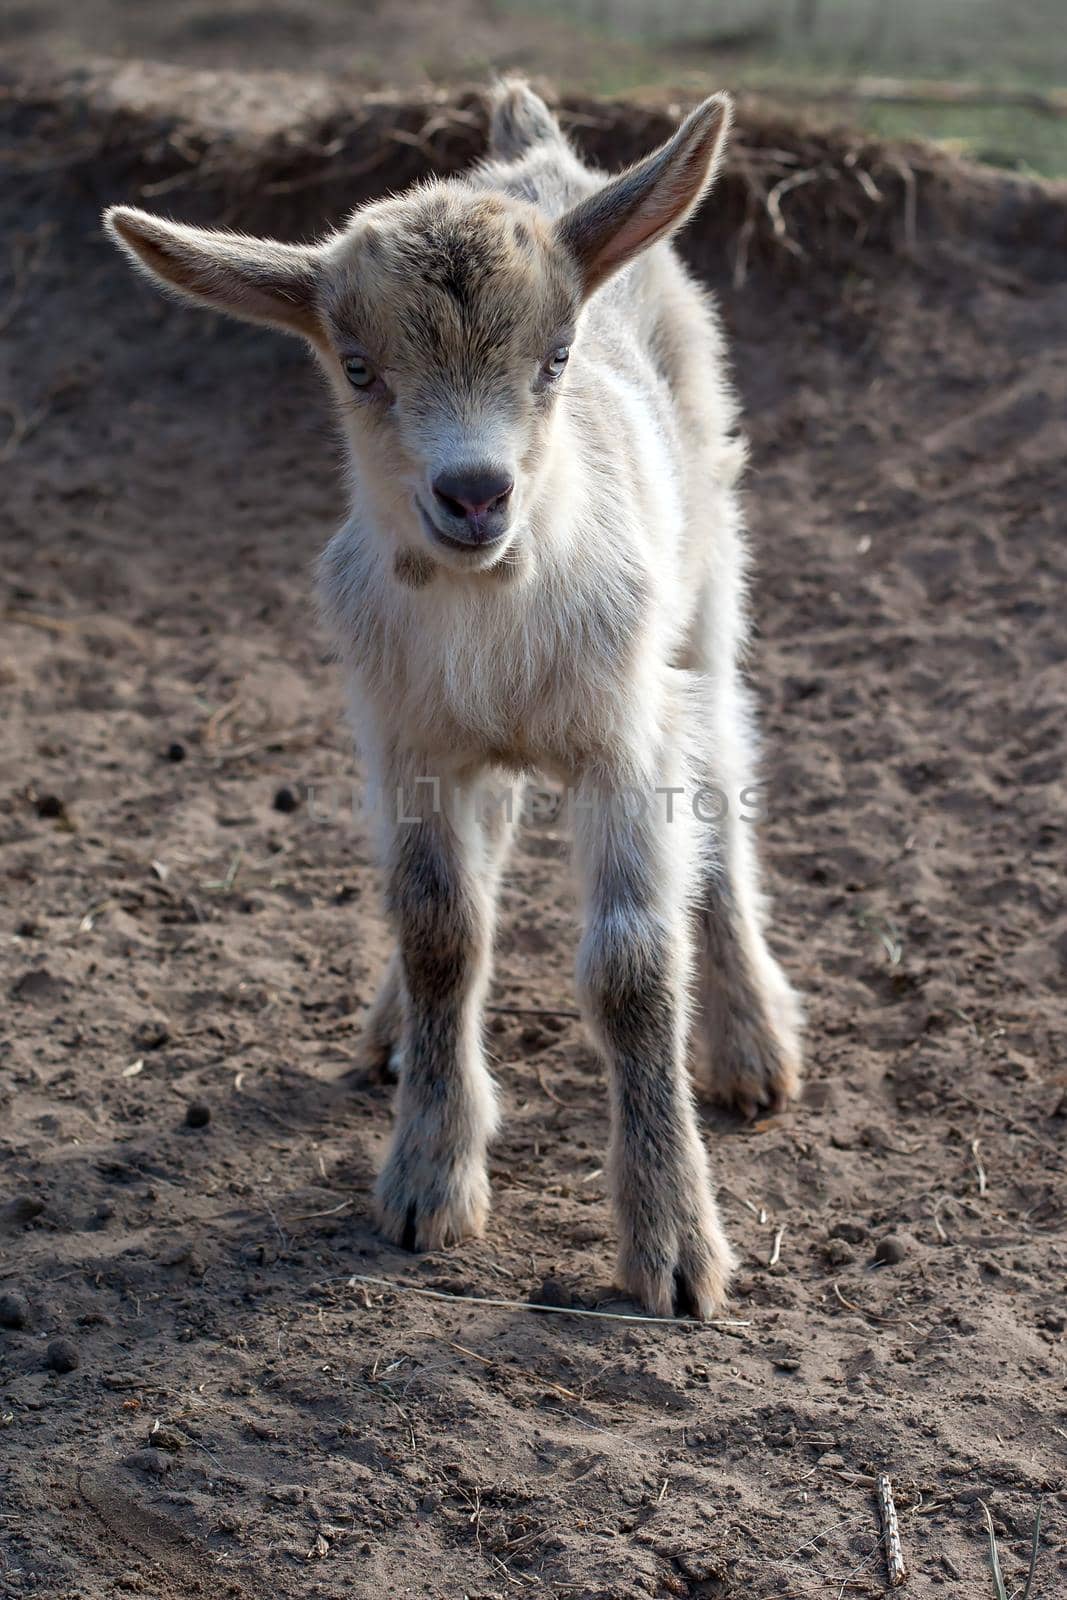 Small cute white goat on the ground